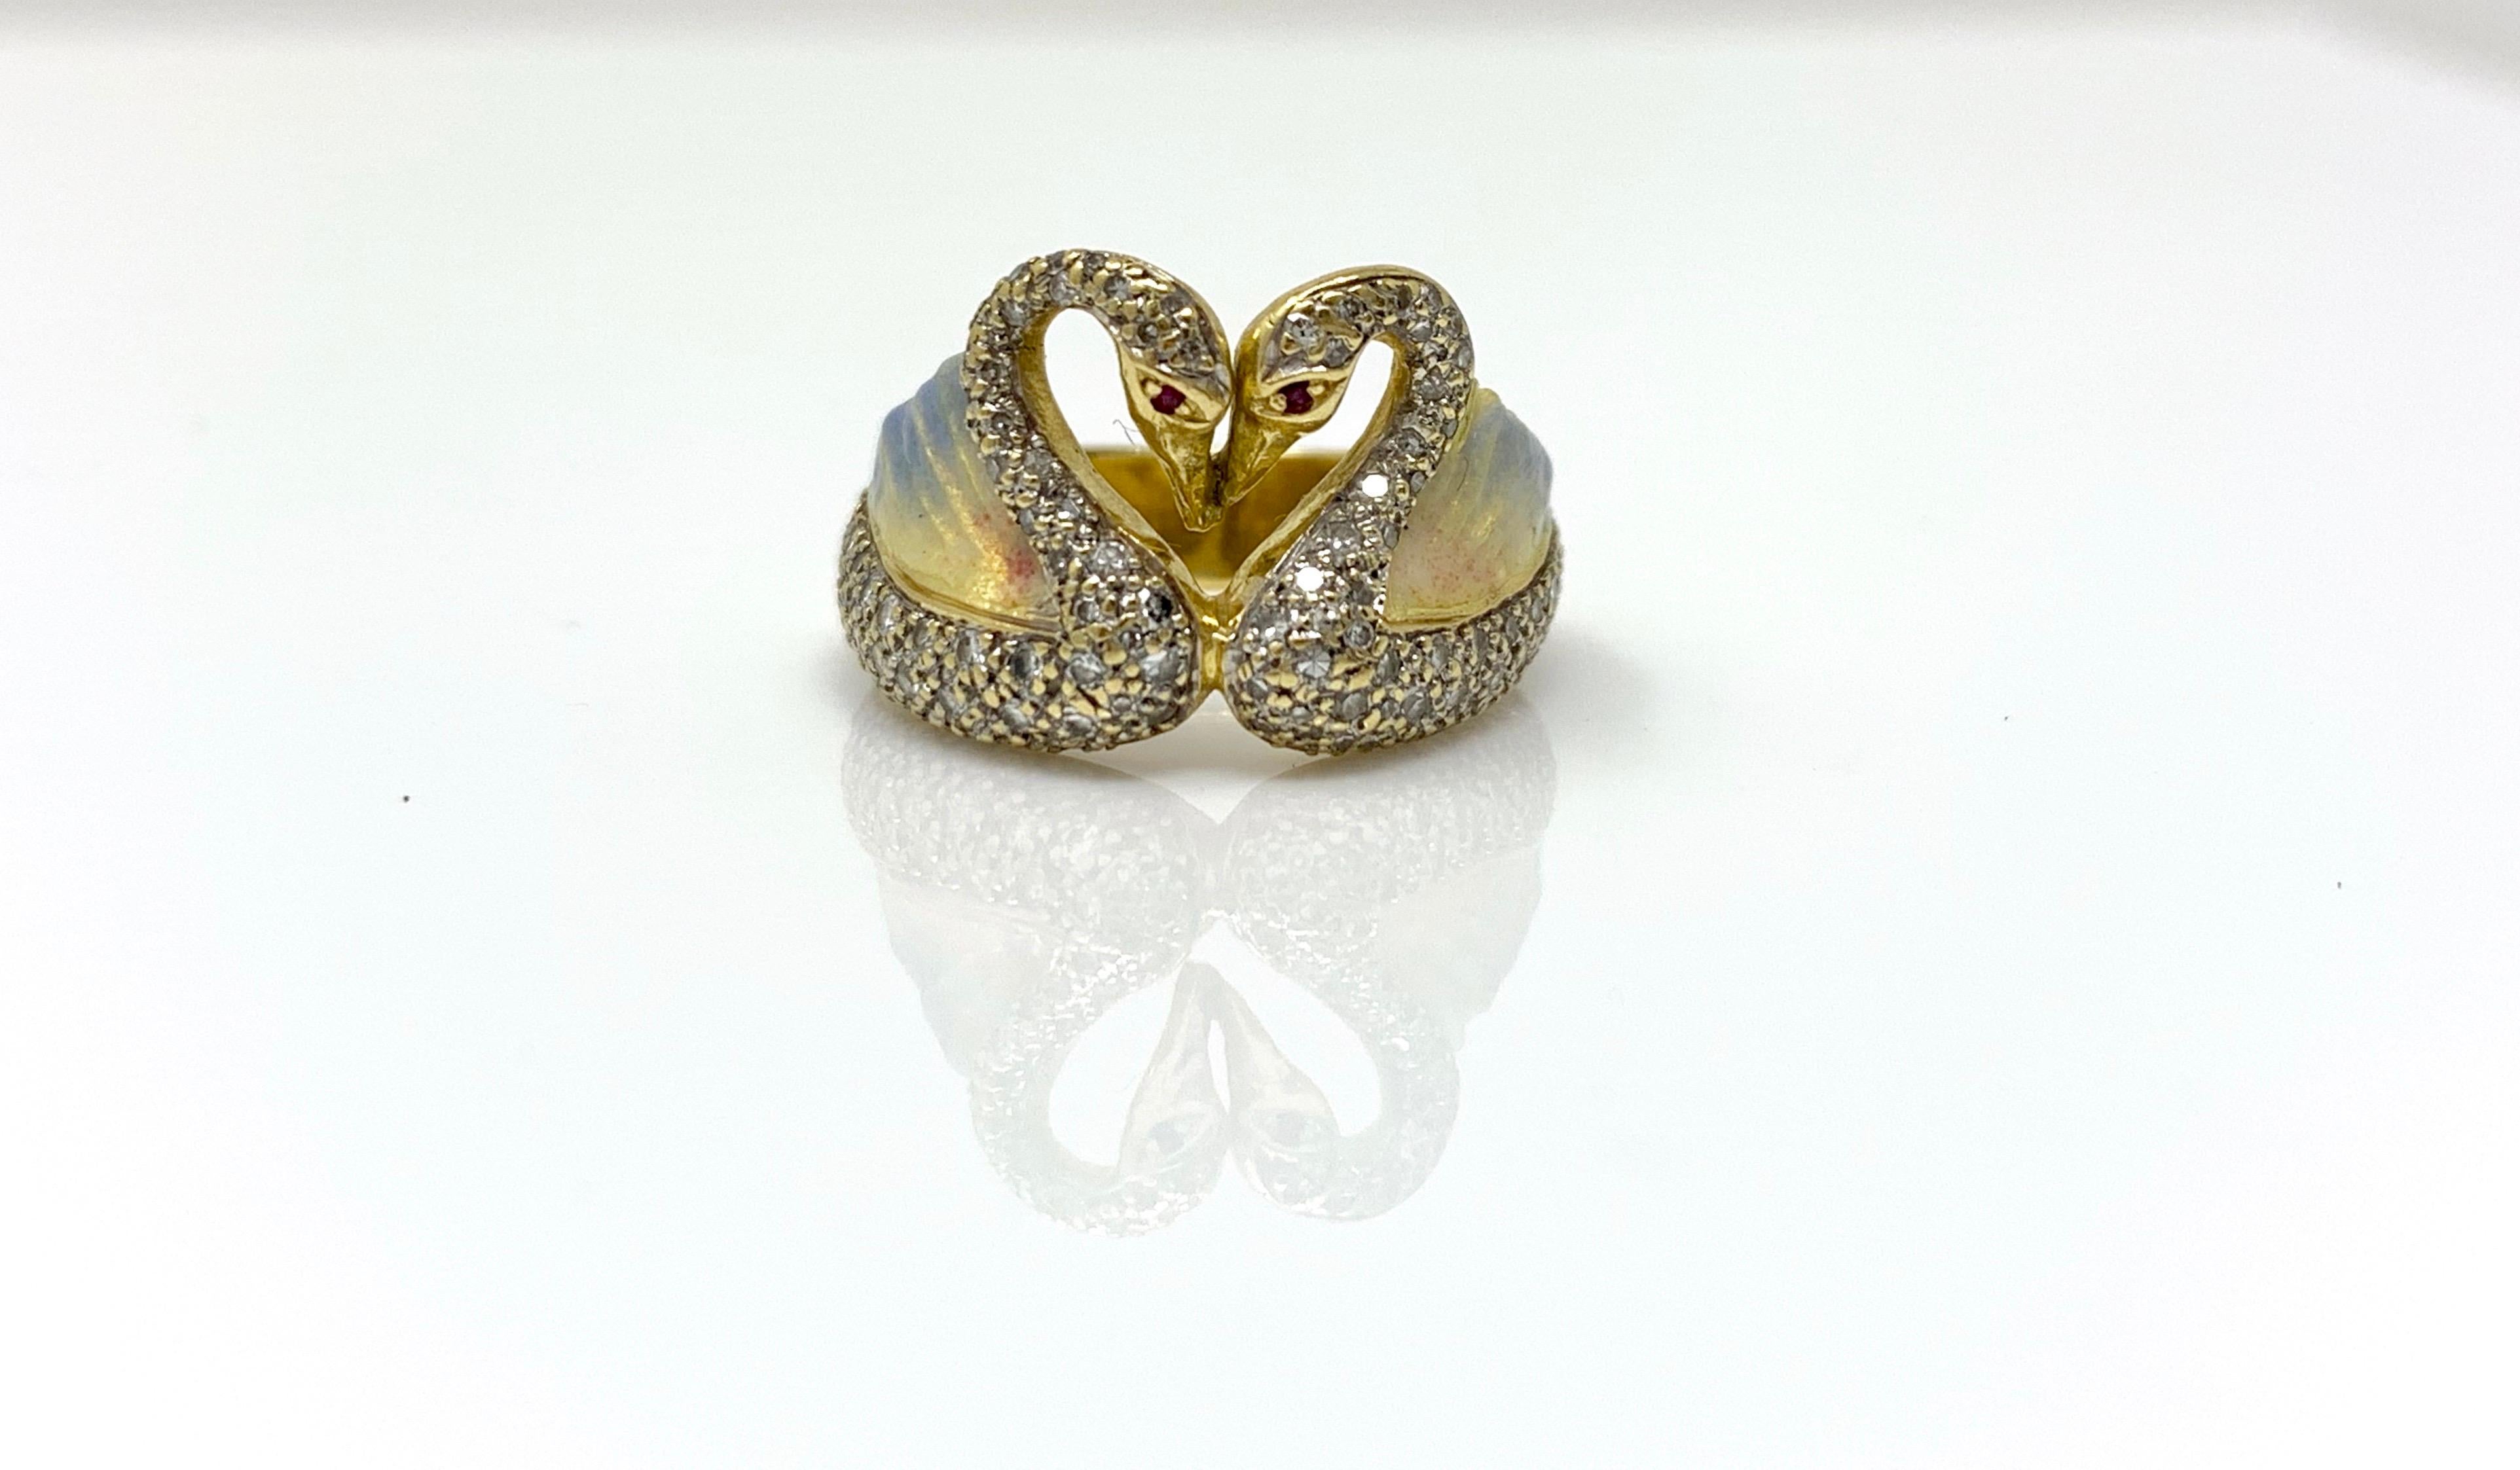 This gorgeous and one of a kind white round brilliant diamond and enamel ring is a symbol of love. Two swans together making a heart in the center. The swans are beautifully pave set with diamonds weighing 1.20 carat approximately with GH color and